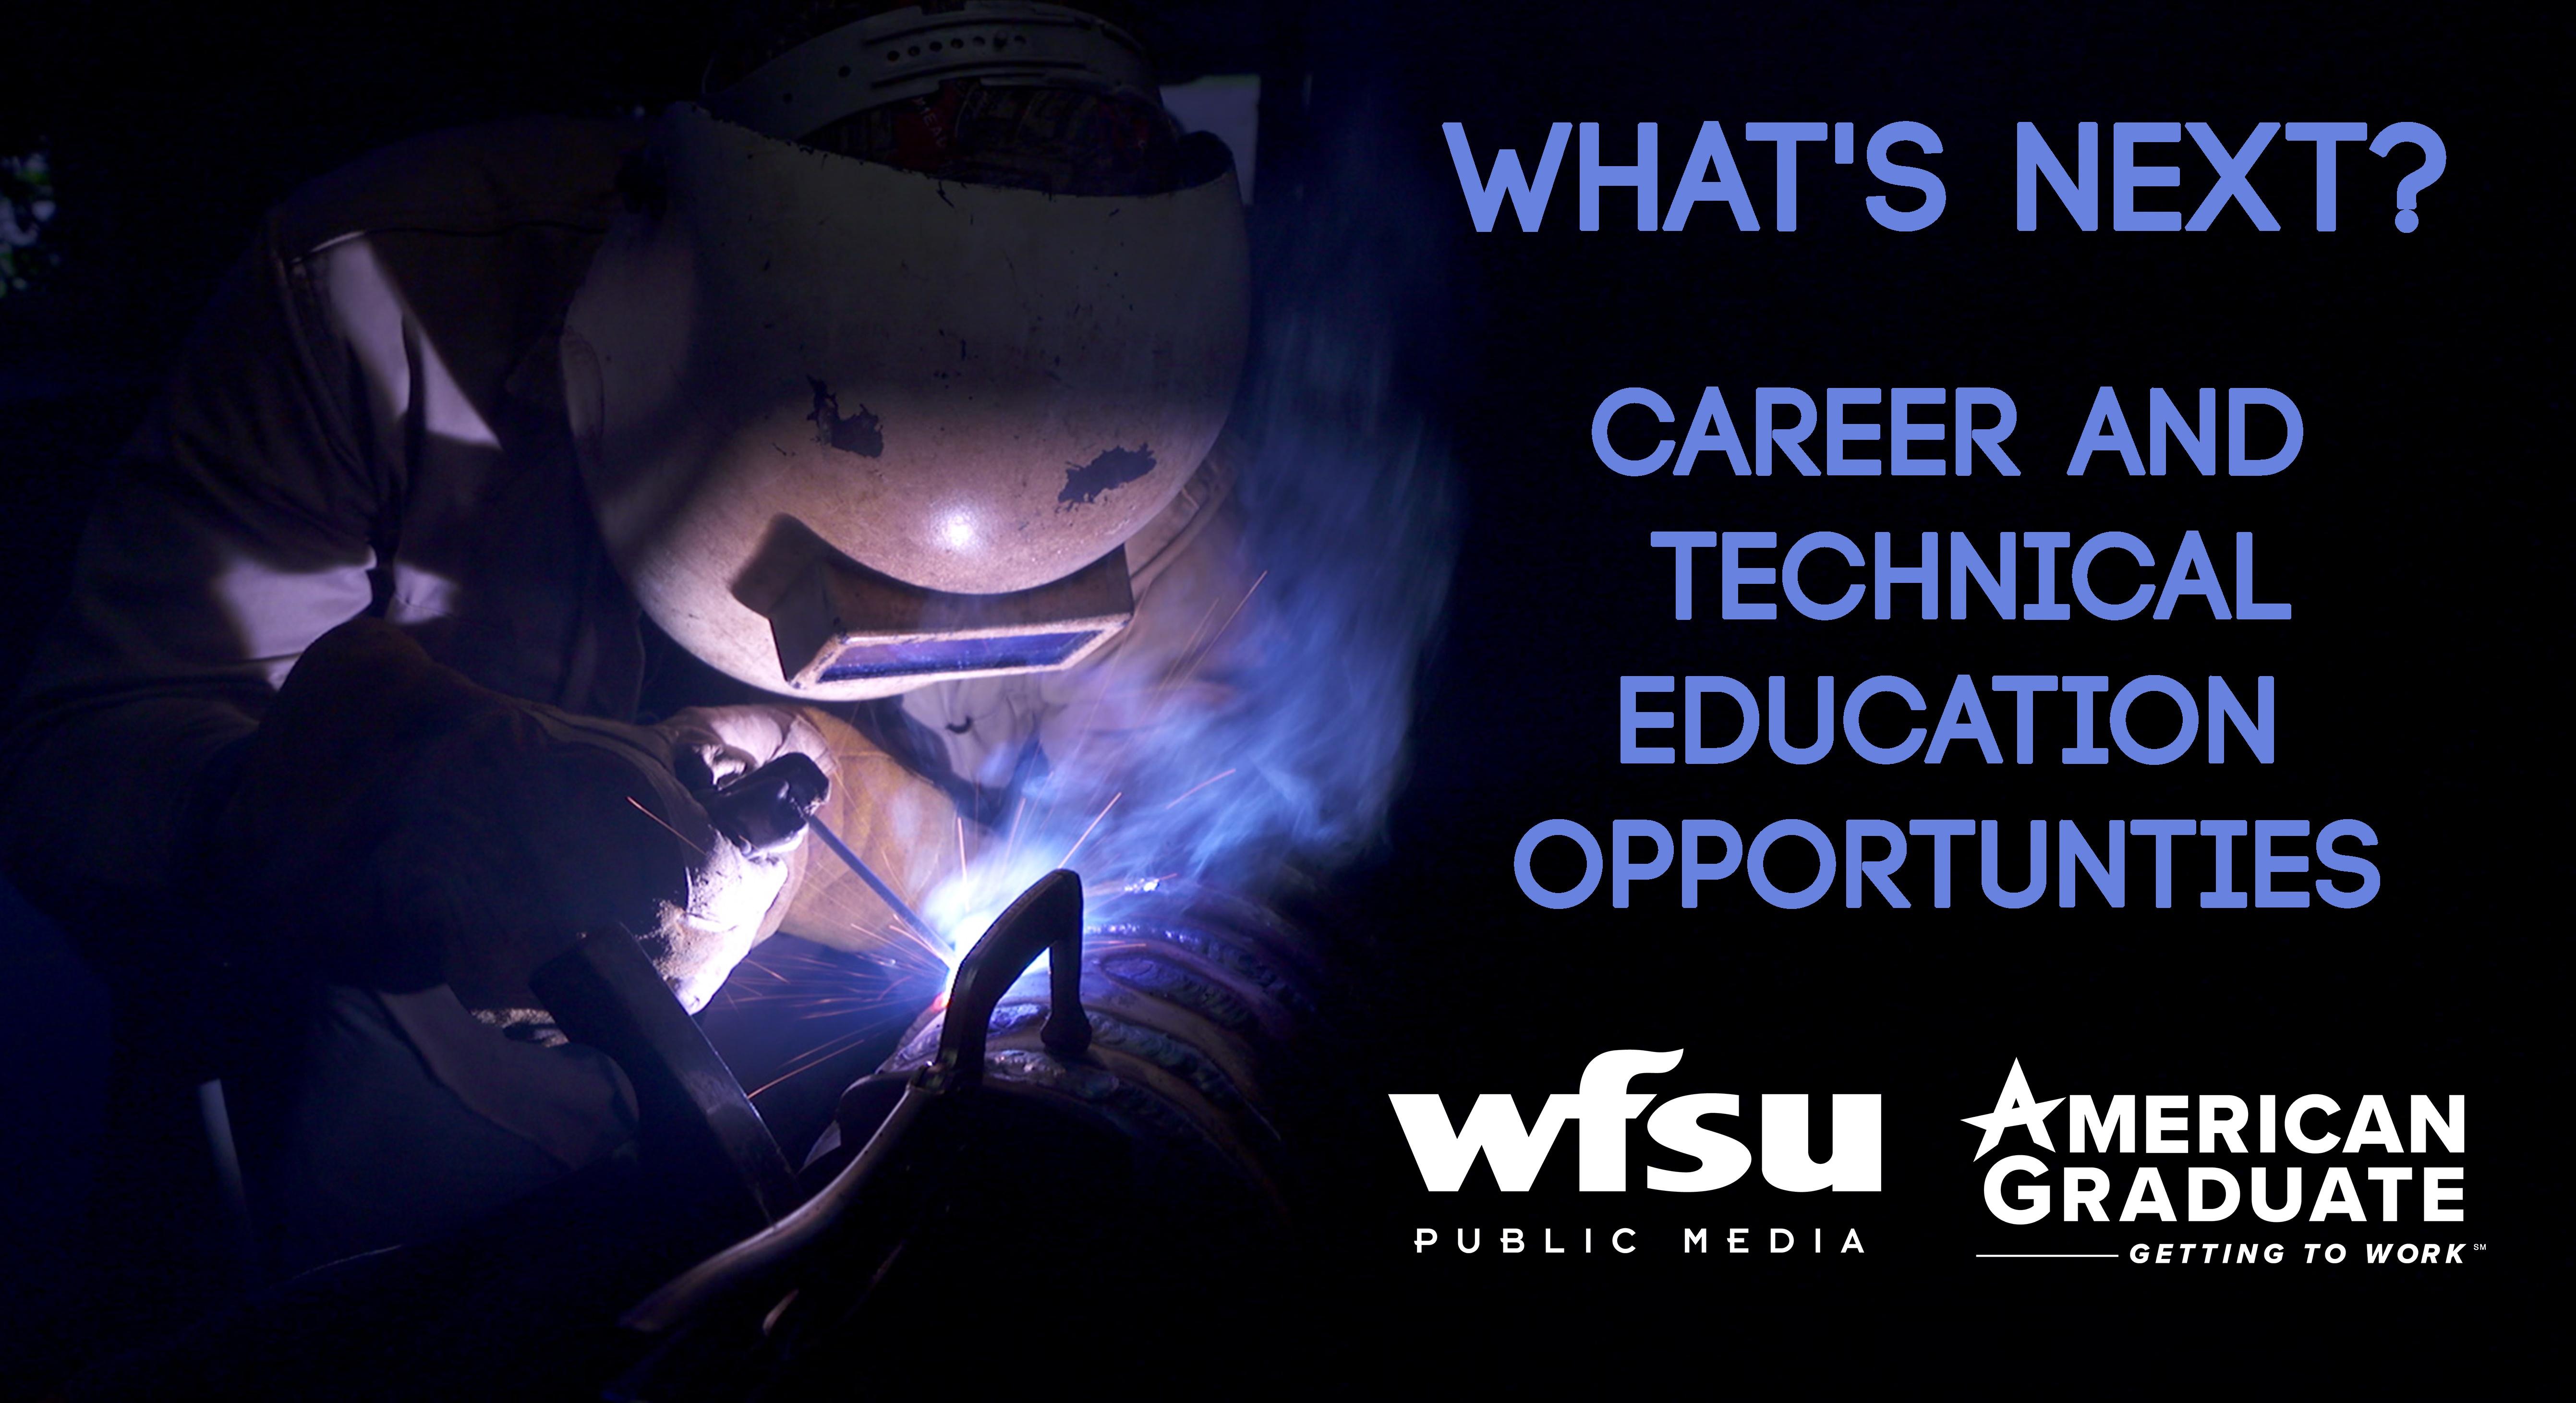 What's Next? Career and Technical Education Oppor